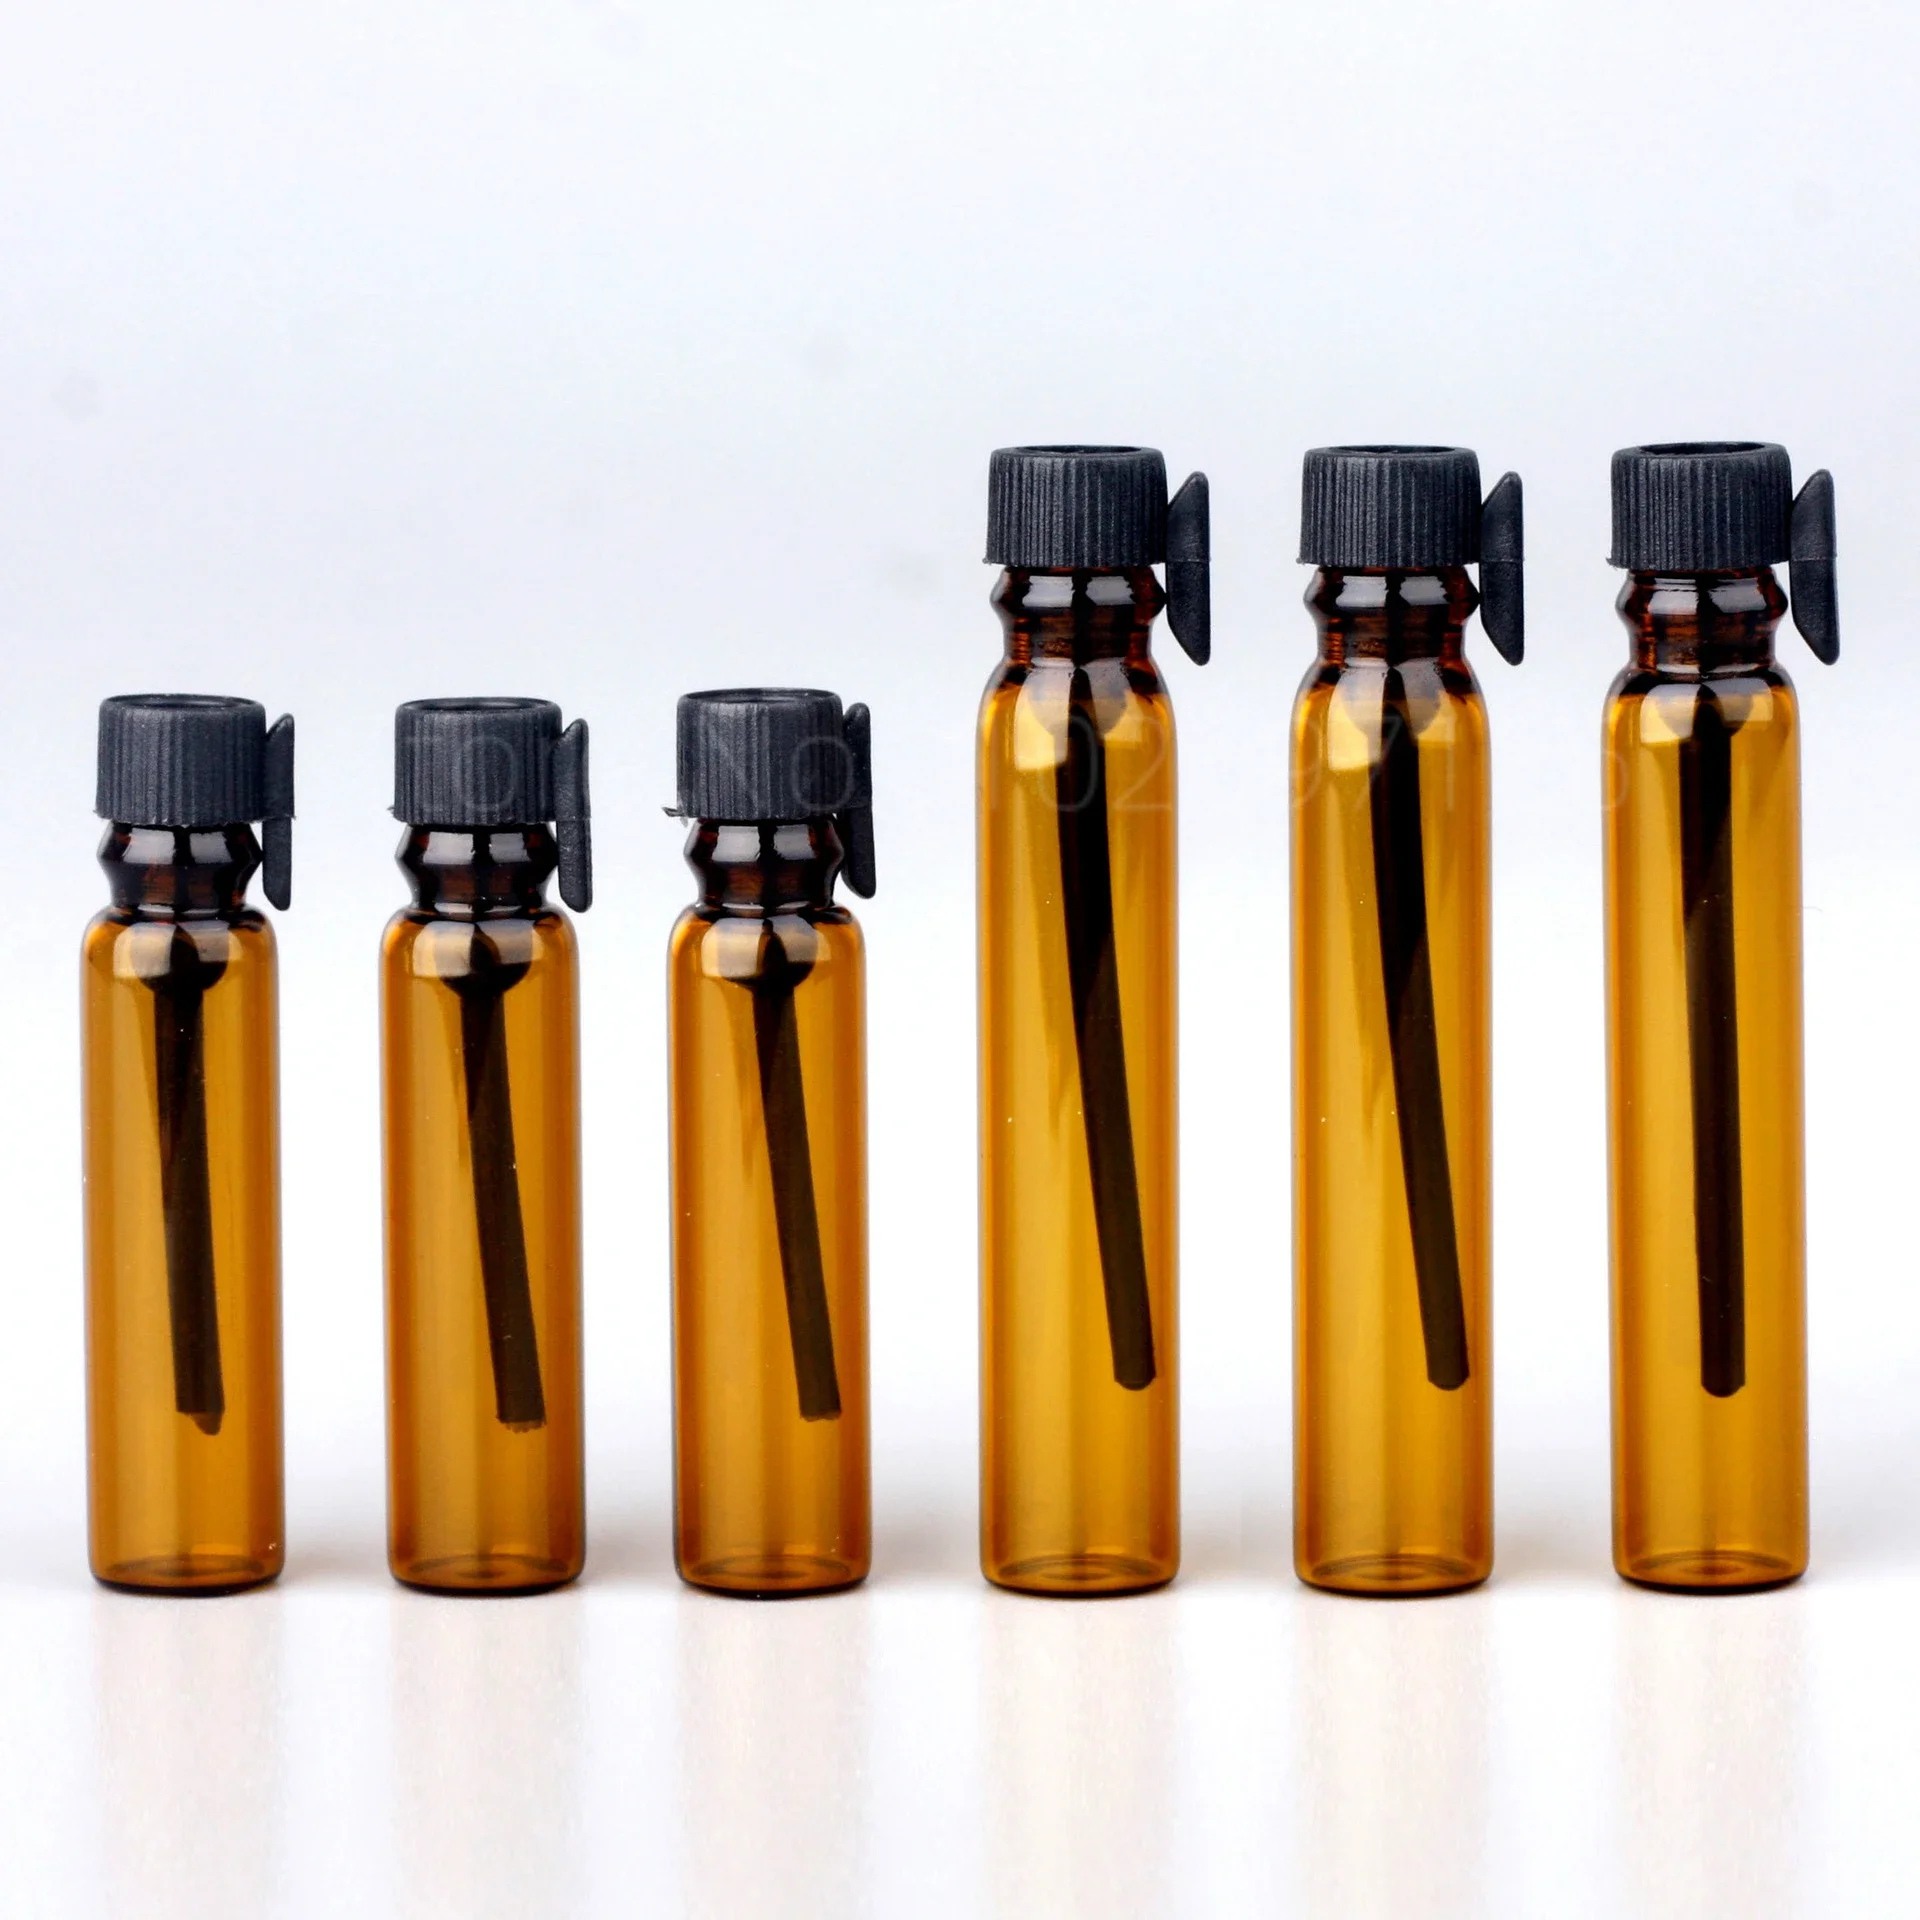 Glass Dropper Bottle Transparent Mini 1ml 2ml Stick Essential Oil with Inner Stopper Sample Trial Use Perfume Sub Bottles Empty glass test tube 17 30 80mm 40ml glass bottles stopper crafts jars small transparent empty diy wishing glass bottle cork gift